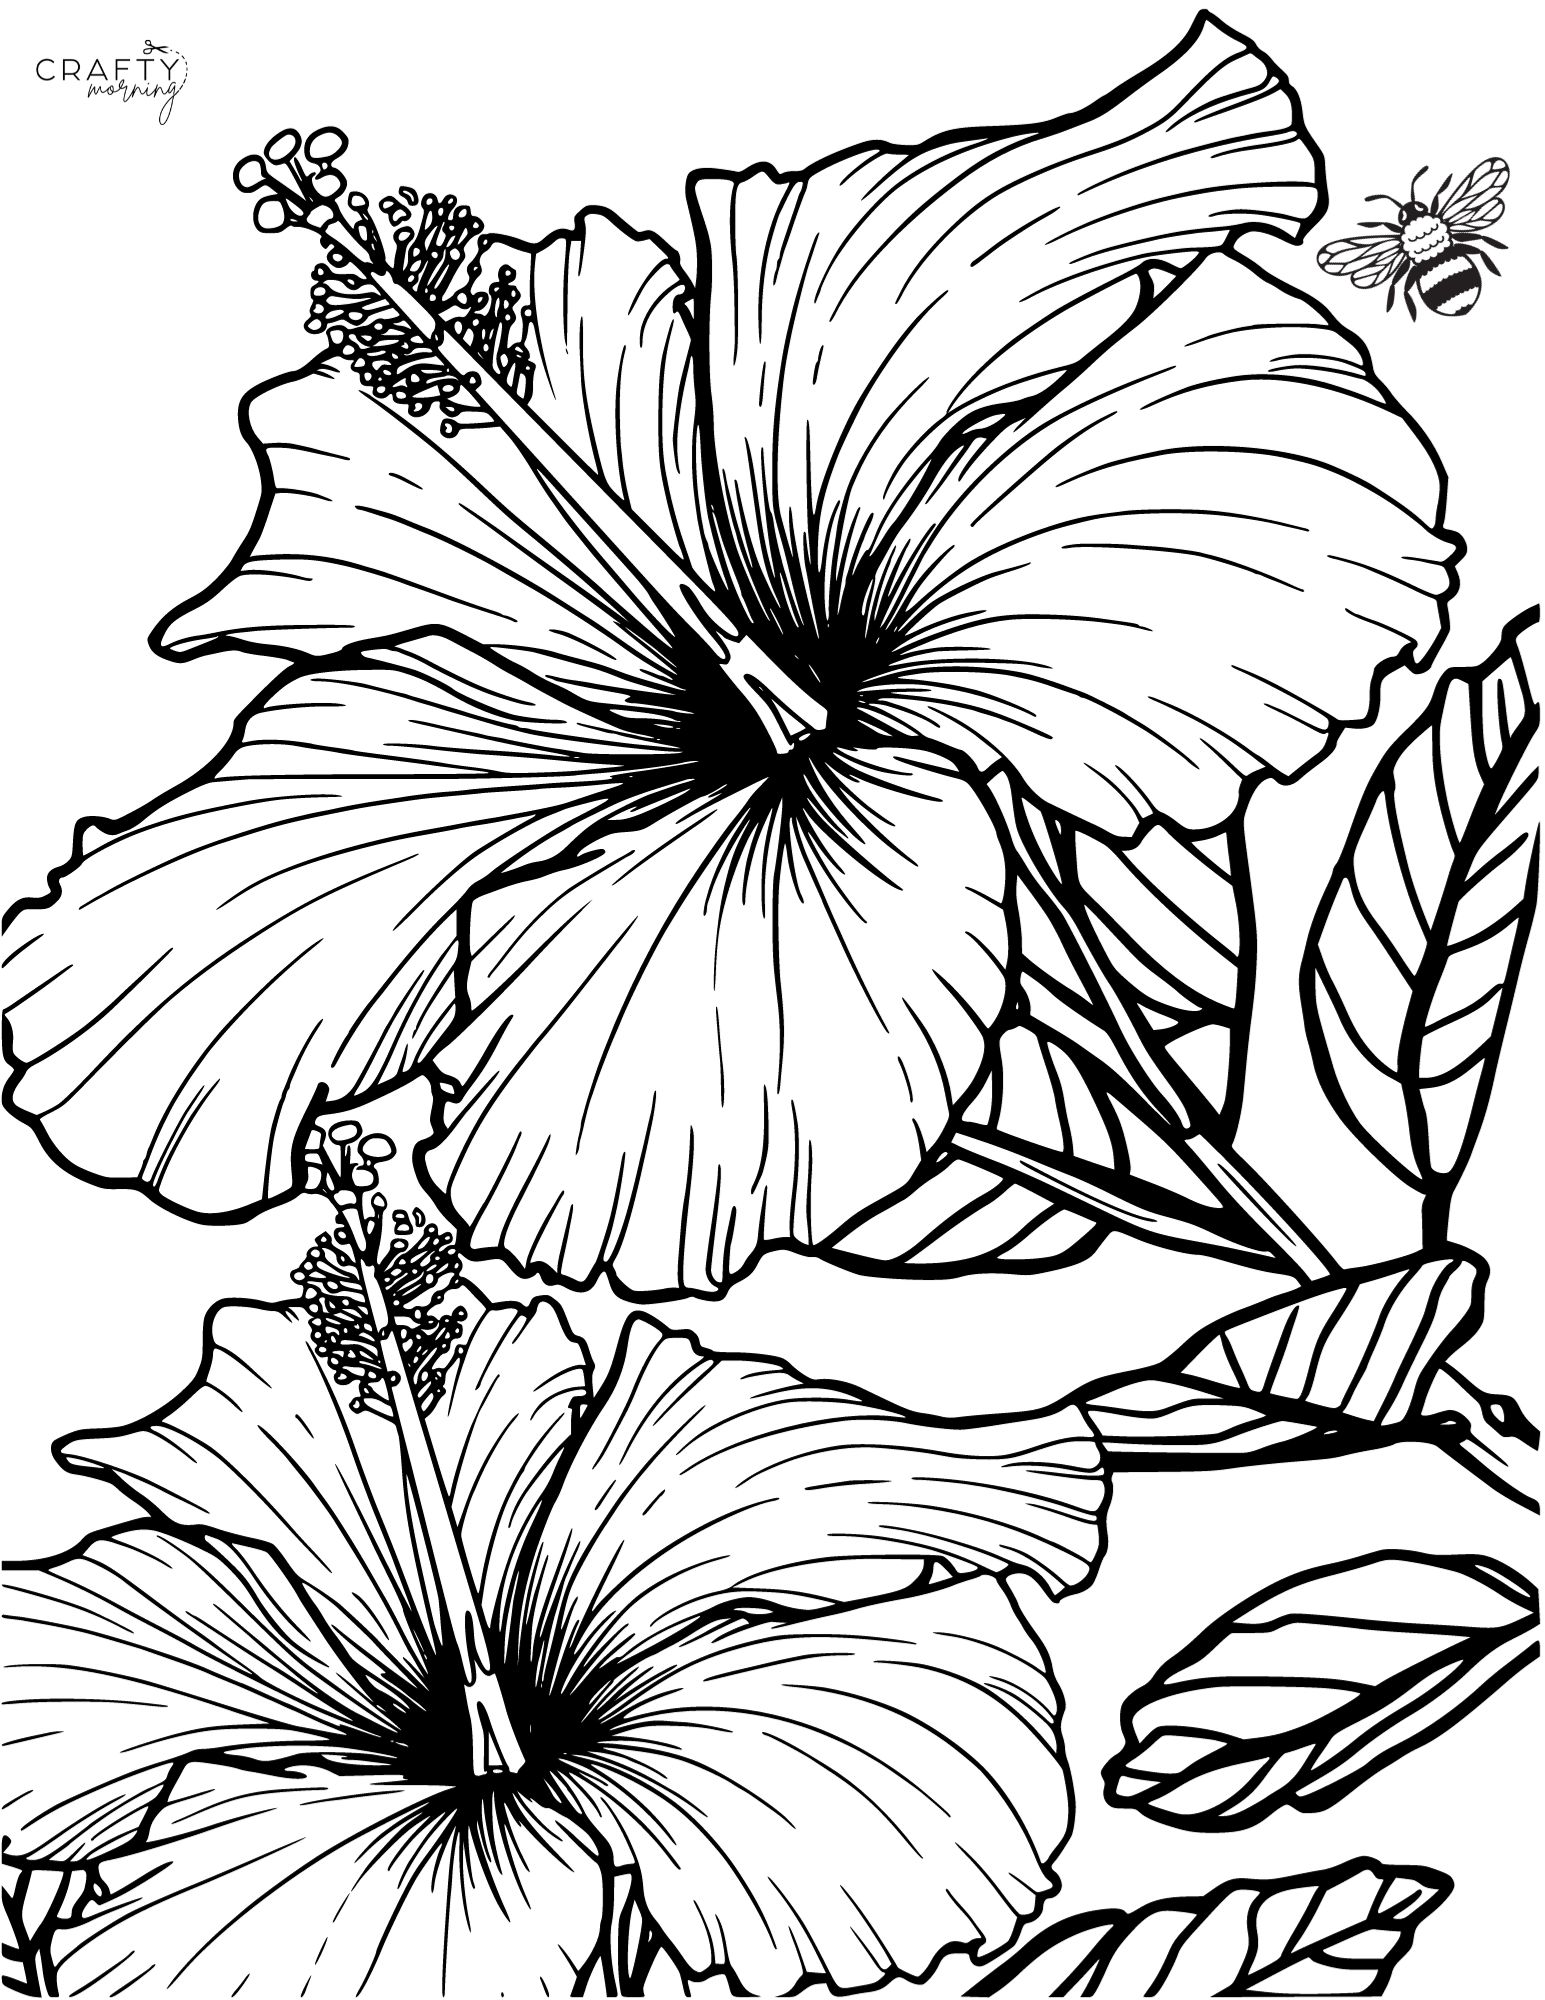 Flower coloring pages to print